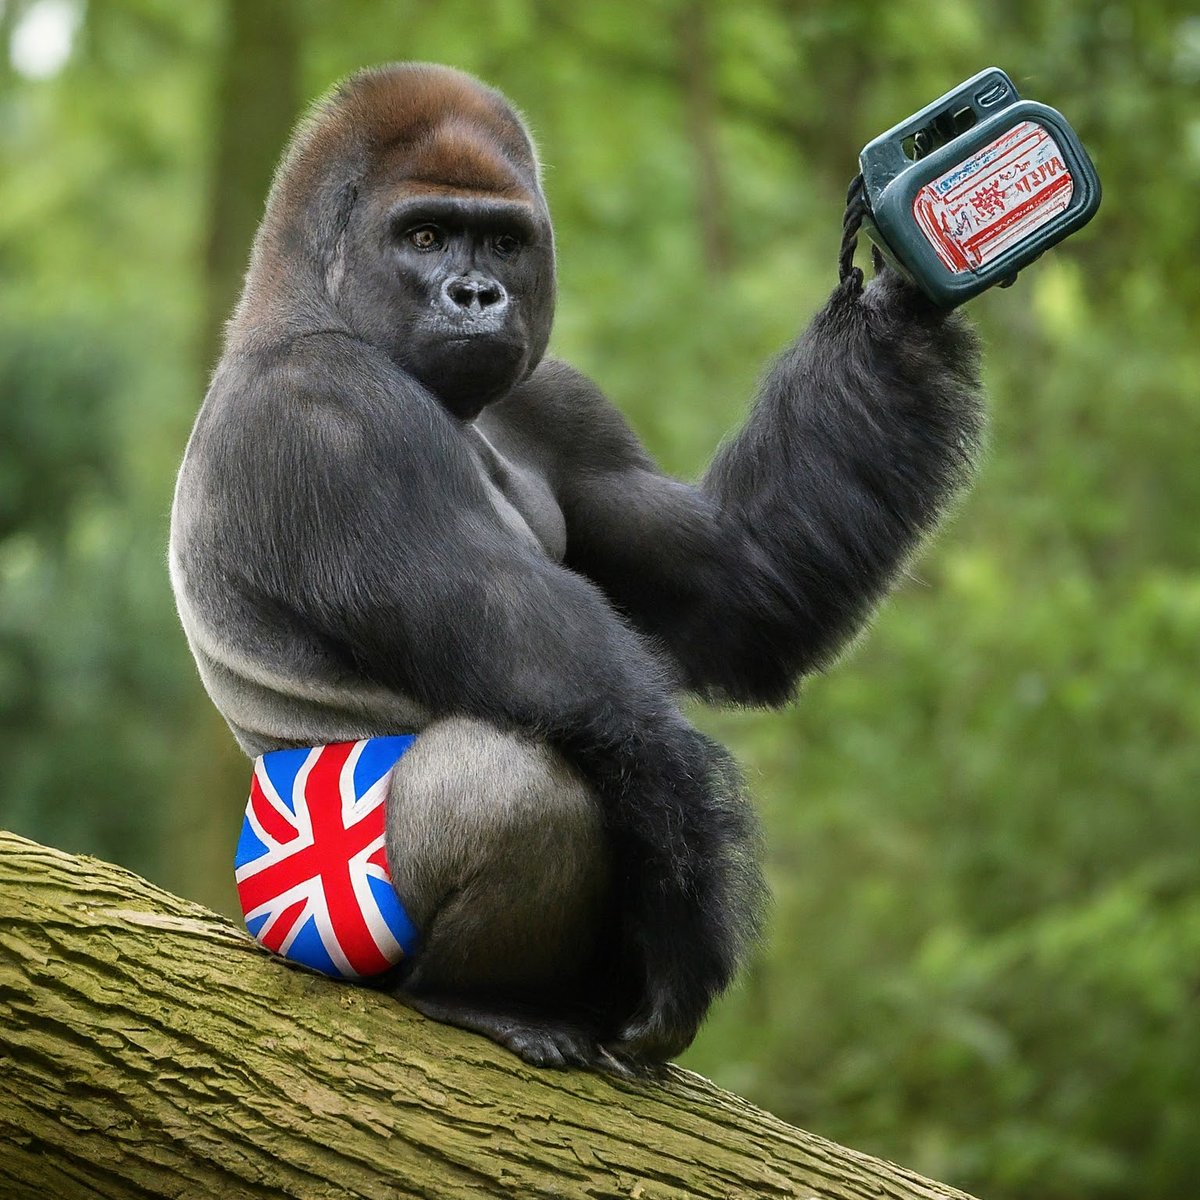 Meanwhile, just spotted up a tree in Bathpool Park. #Gullis #GullisOut #ToriesOut677